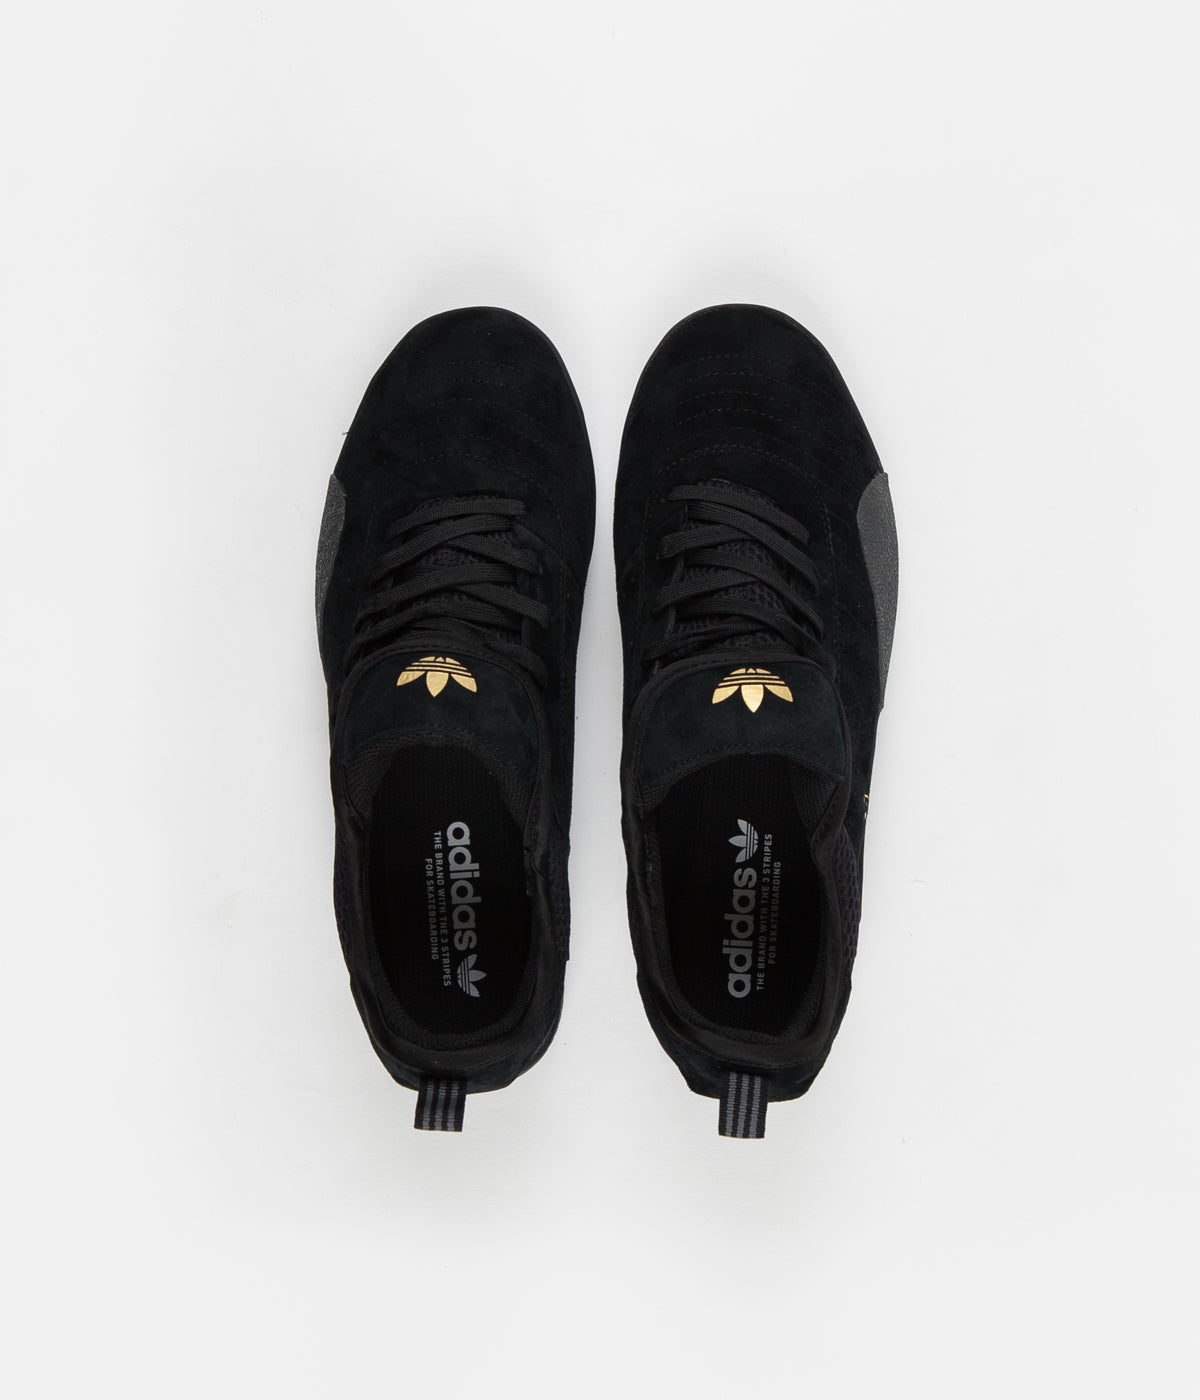 adidas black shoes with gold stripes